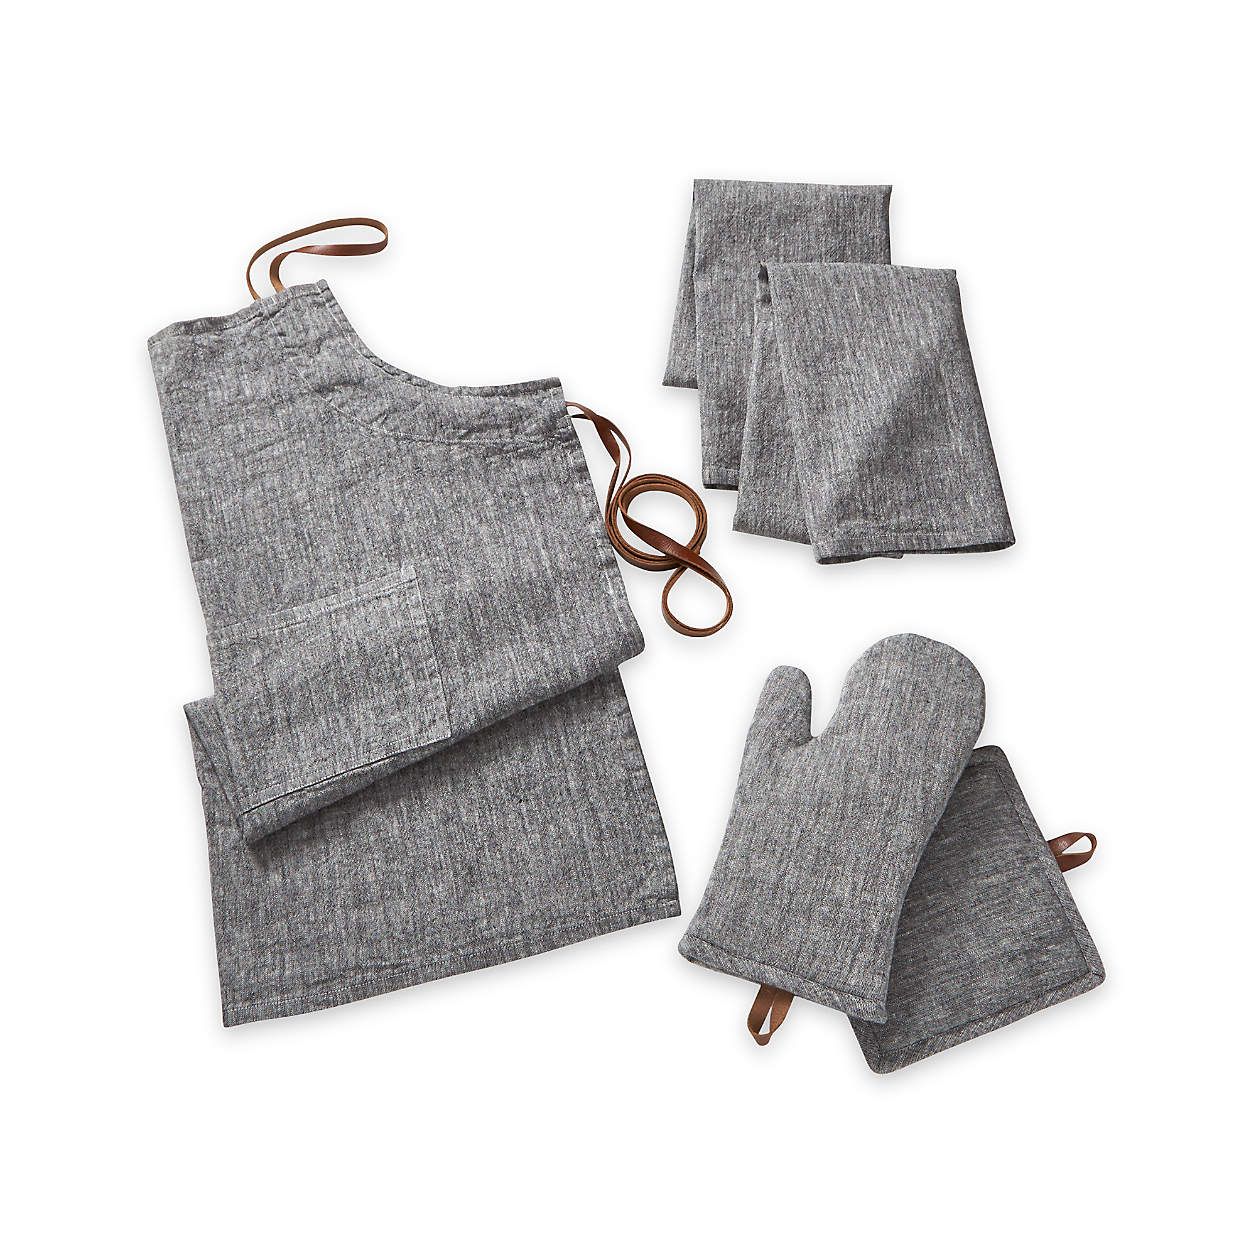 Chambray Grey Apron with Pocket + Reviews | Crate and Barrel | Crate & Barrel